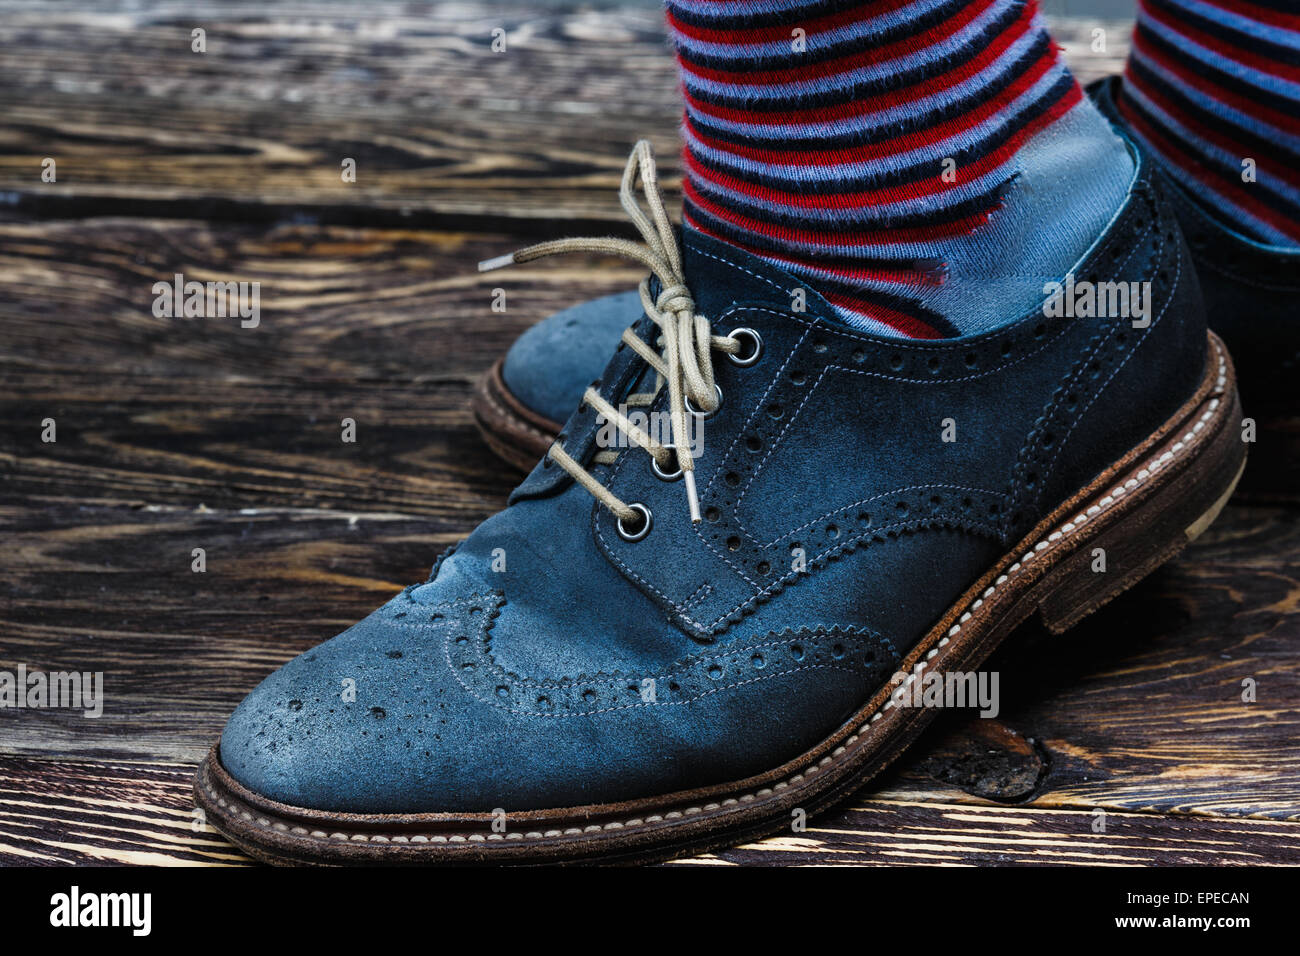 Close up of men's brogues (also known as derbies,gibsons or wingtips) made from blue oiled suede. Stripped socks are also shown Stock Photo